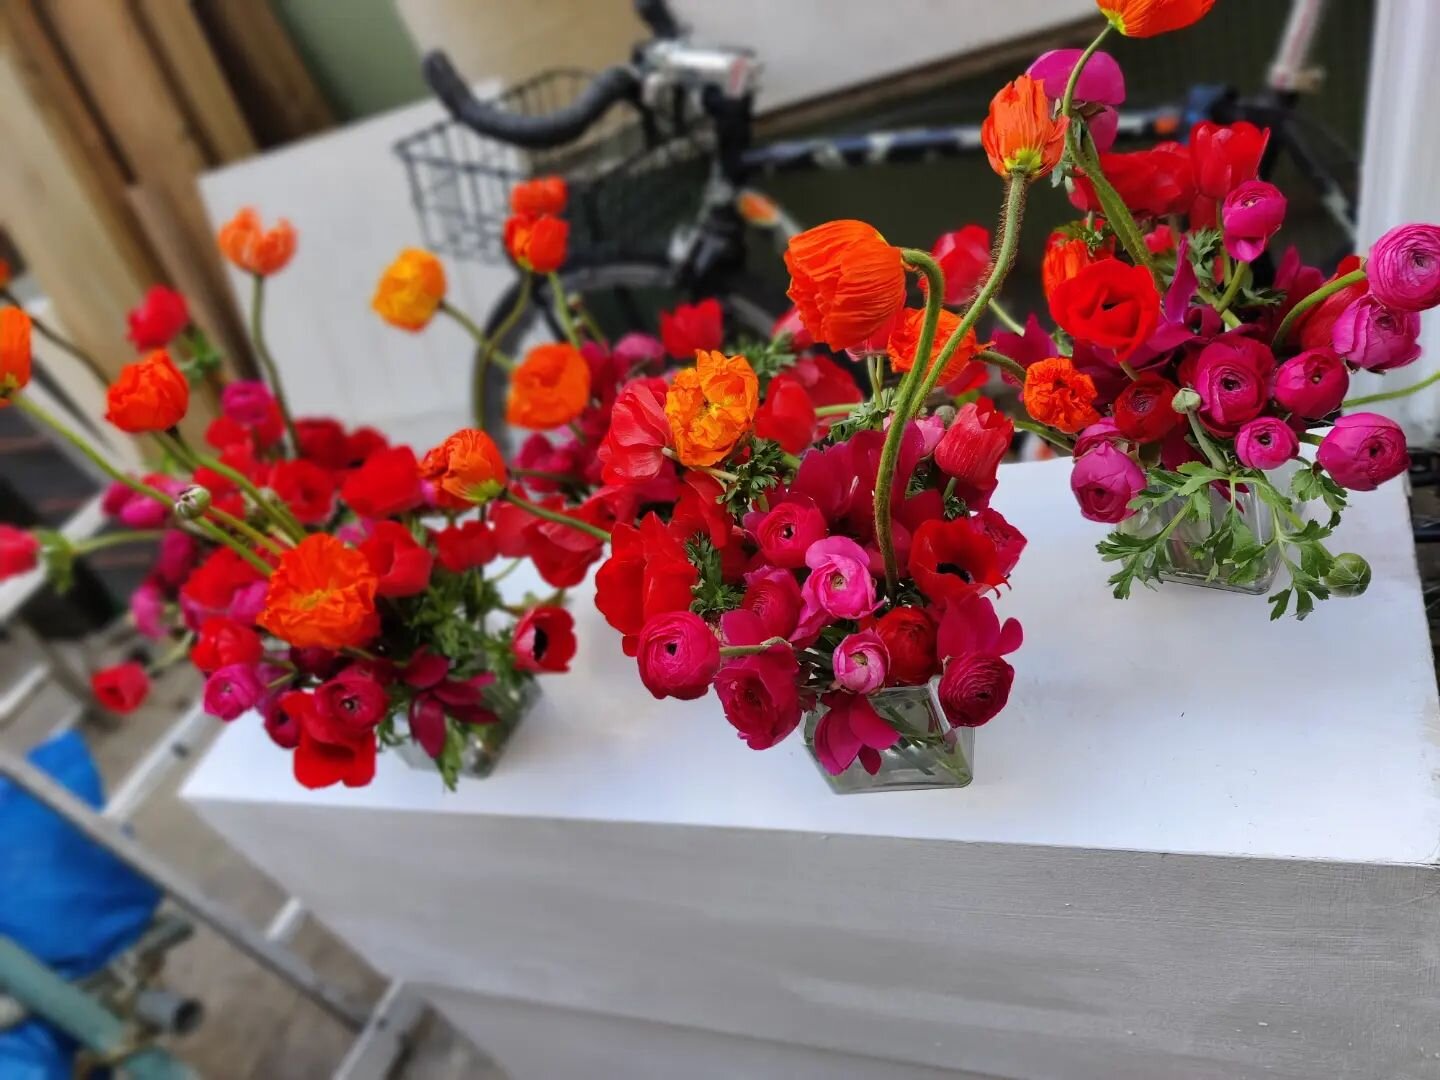 🧡Unfiltered flowers for a birthday party. Fave thing this last season was cyclamen cuttings and stems. 🧡The most beautiful matte cerise colour. Just a vibe for a #foamfree table runner.
-
-
-
@catelebon 🎹 what you said was nice, when my face turne